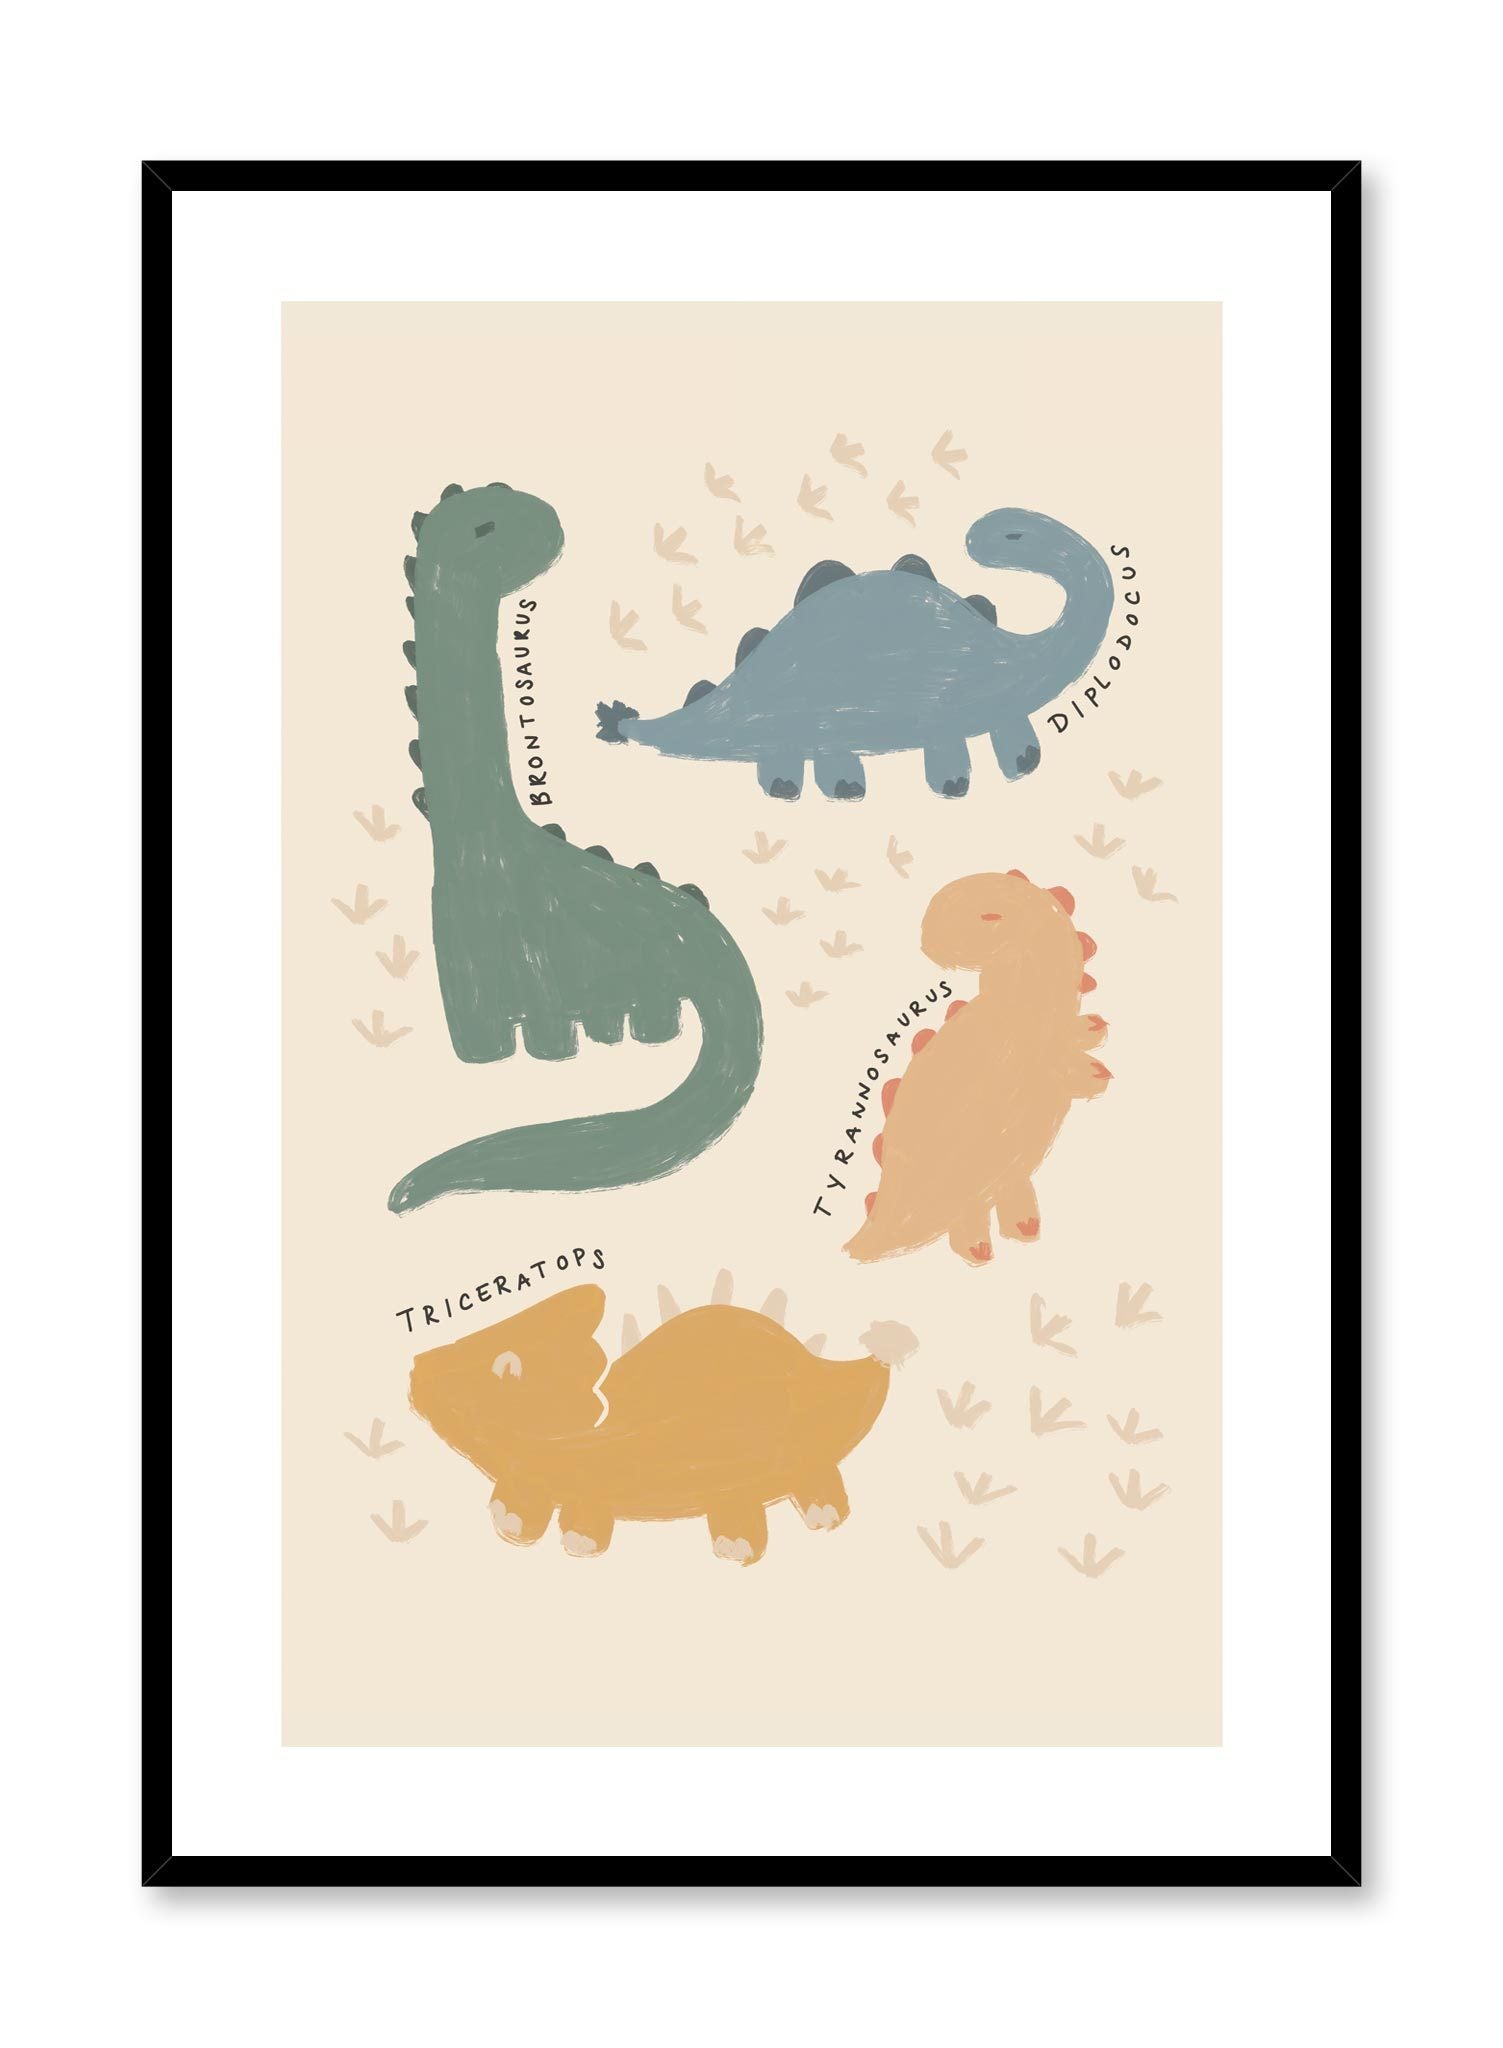 Dinos that I Know is a minimalist illustration by Opposite Wall of four different types of dinosaurs and their names next to it.